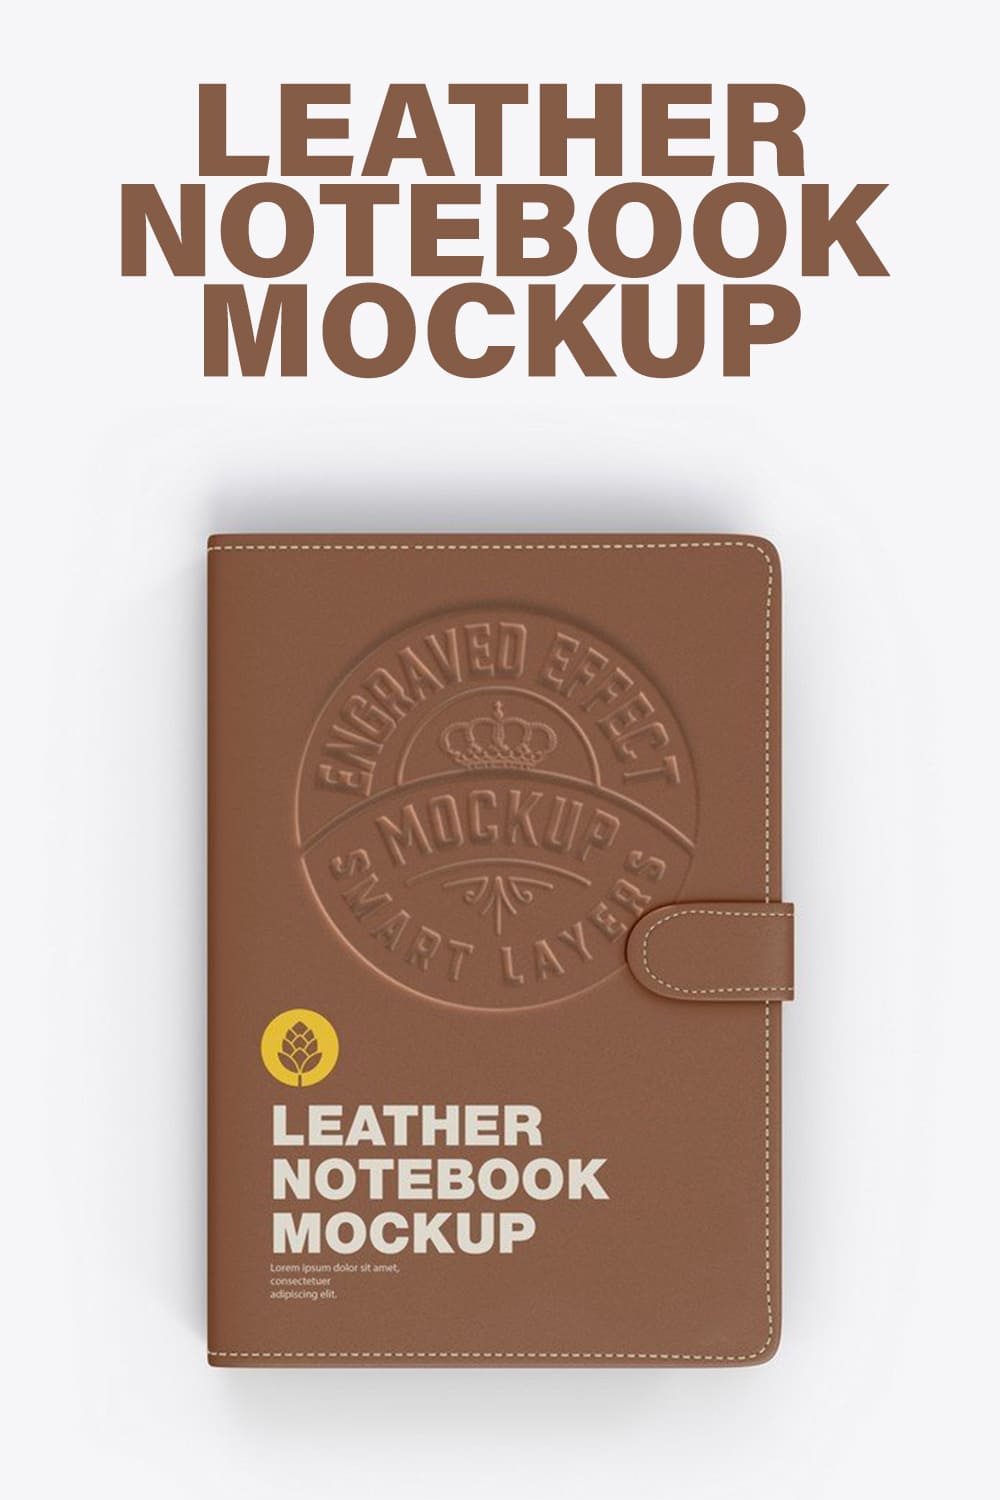 Image of a leather notepad with a charming design.